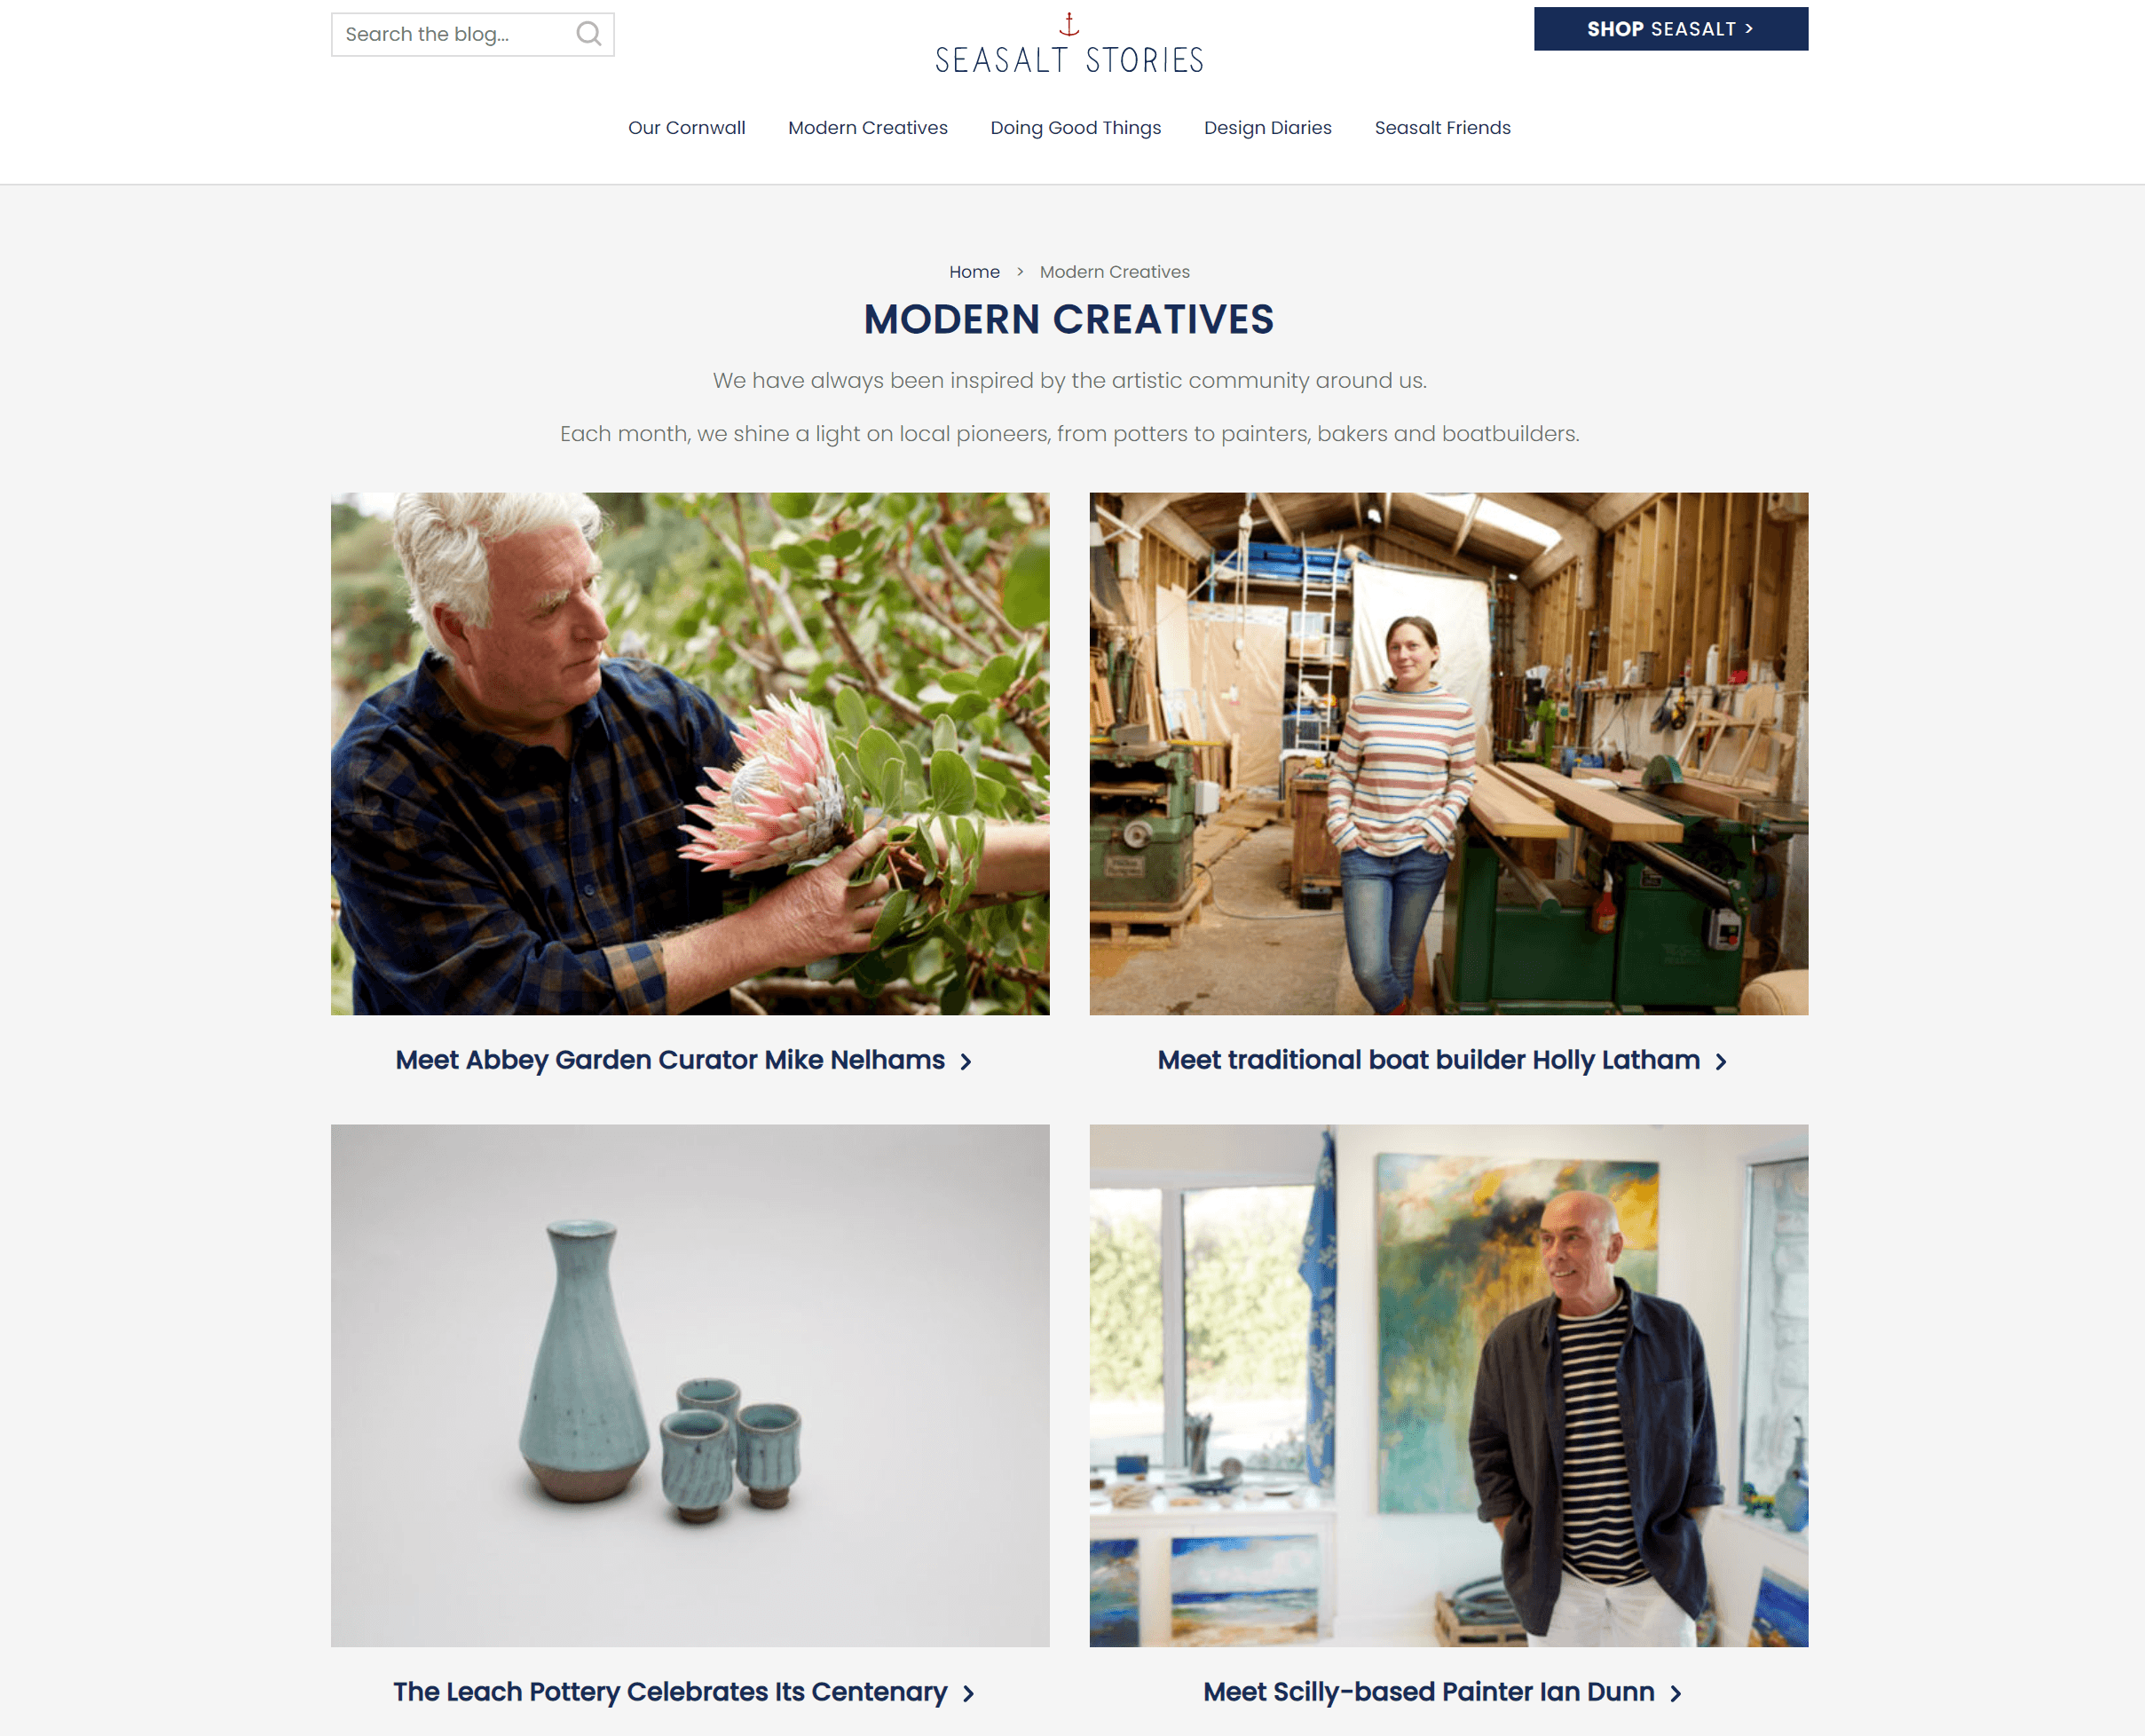 creenshot of the Modern Creatives category page on the Seasalt blog.